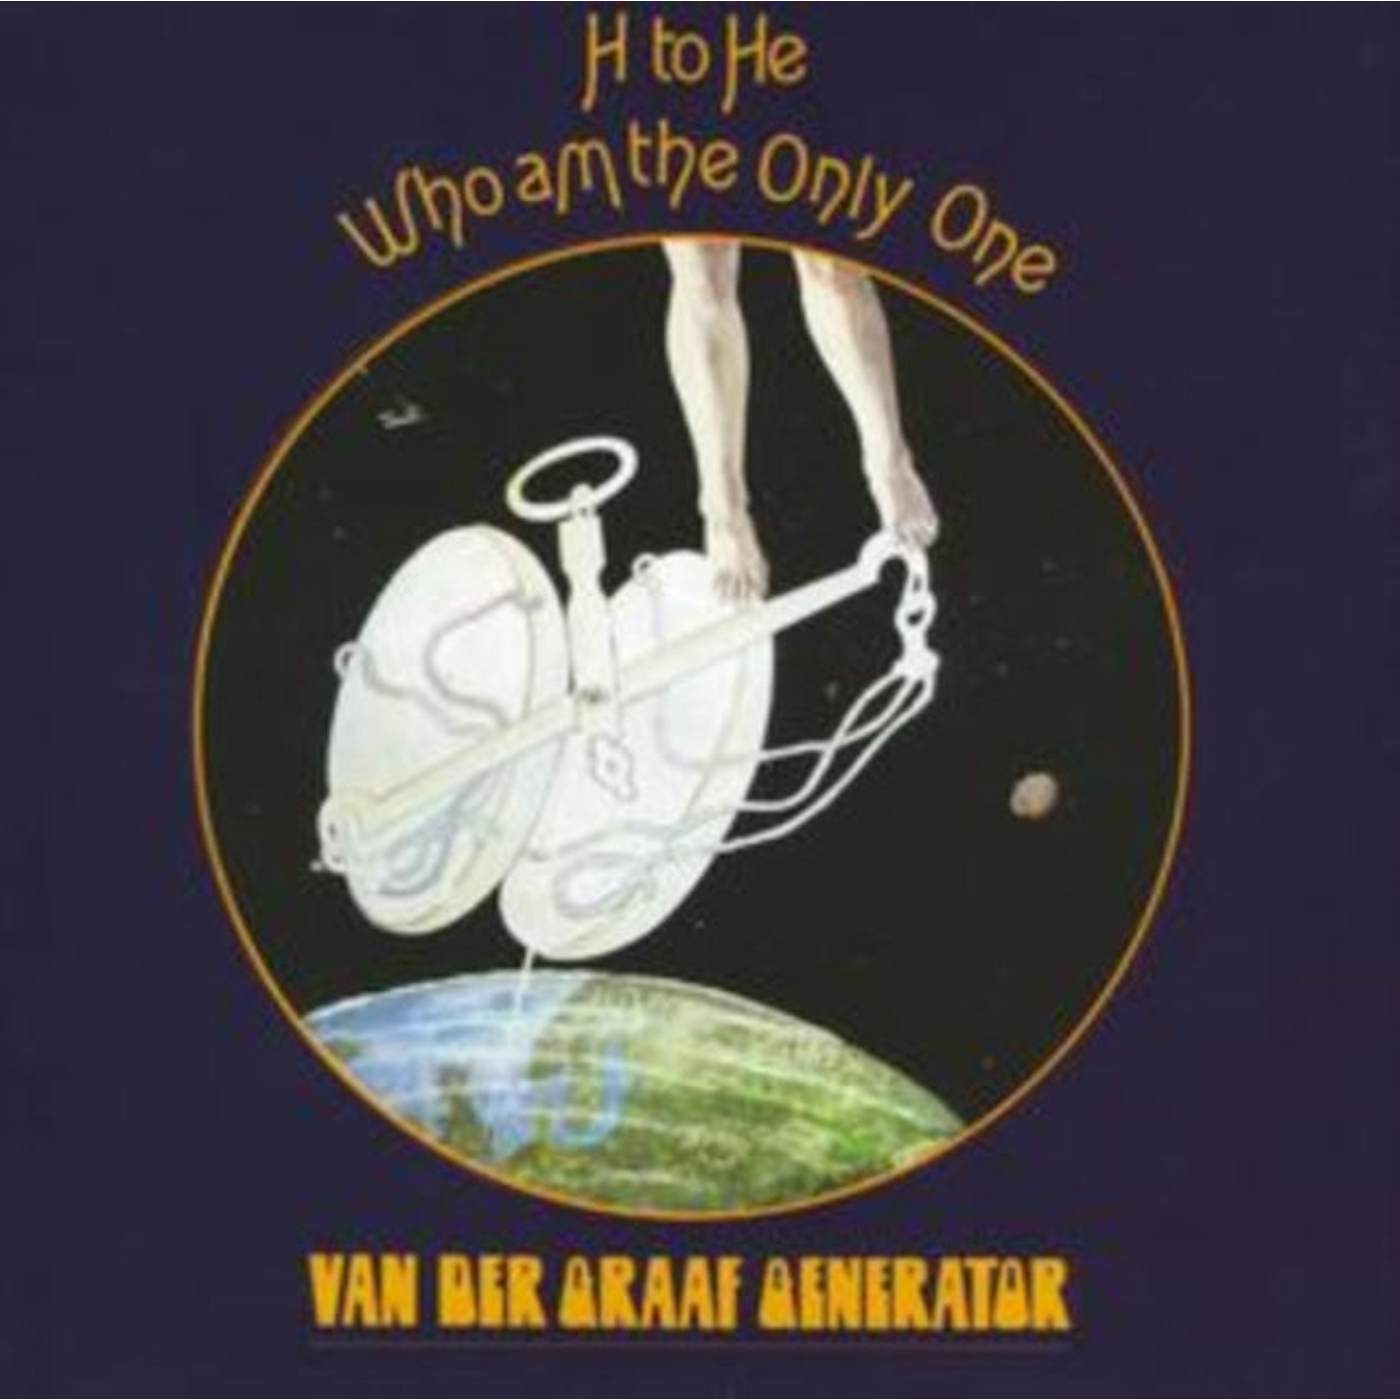 Van Der Graaf Generator CD - H To He Who Am The Only One